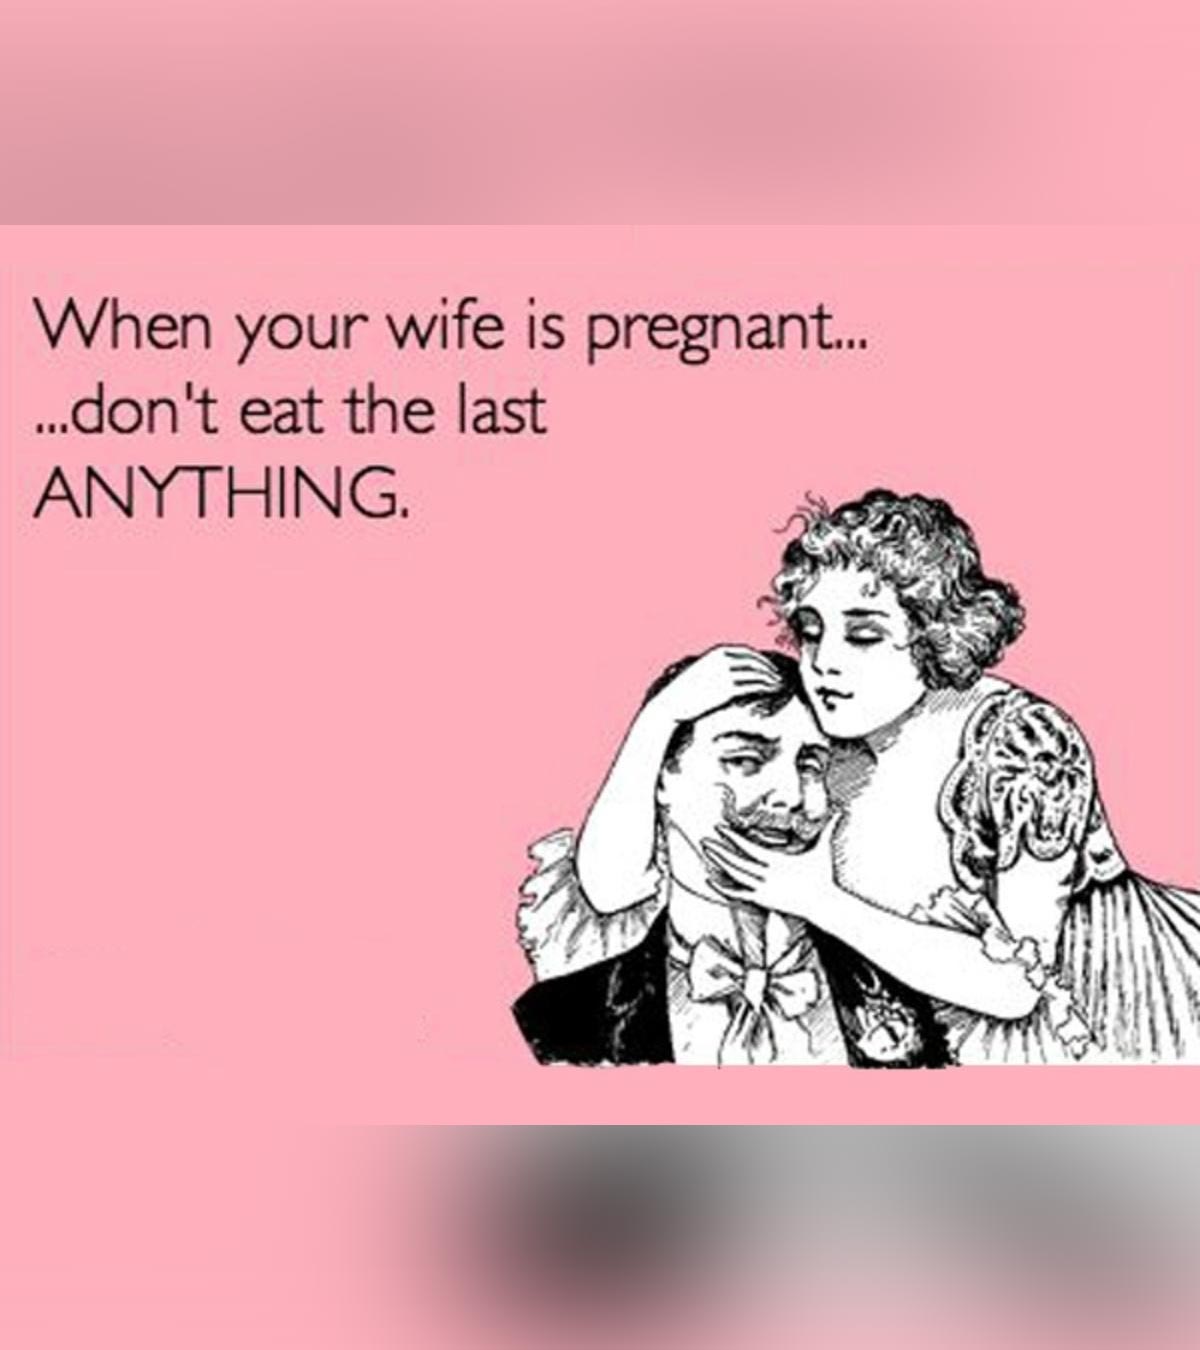 15 Funniest Pregnancy Memes On The Web